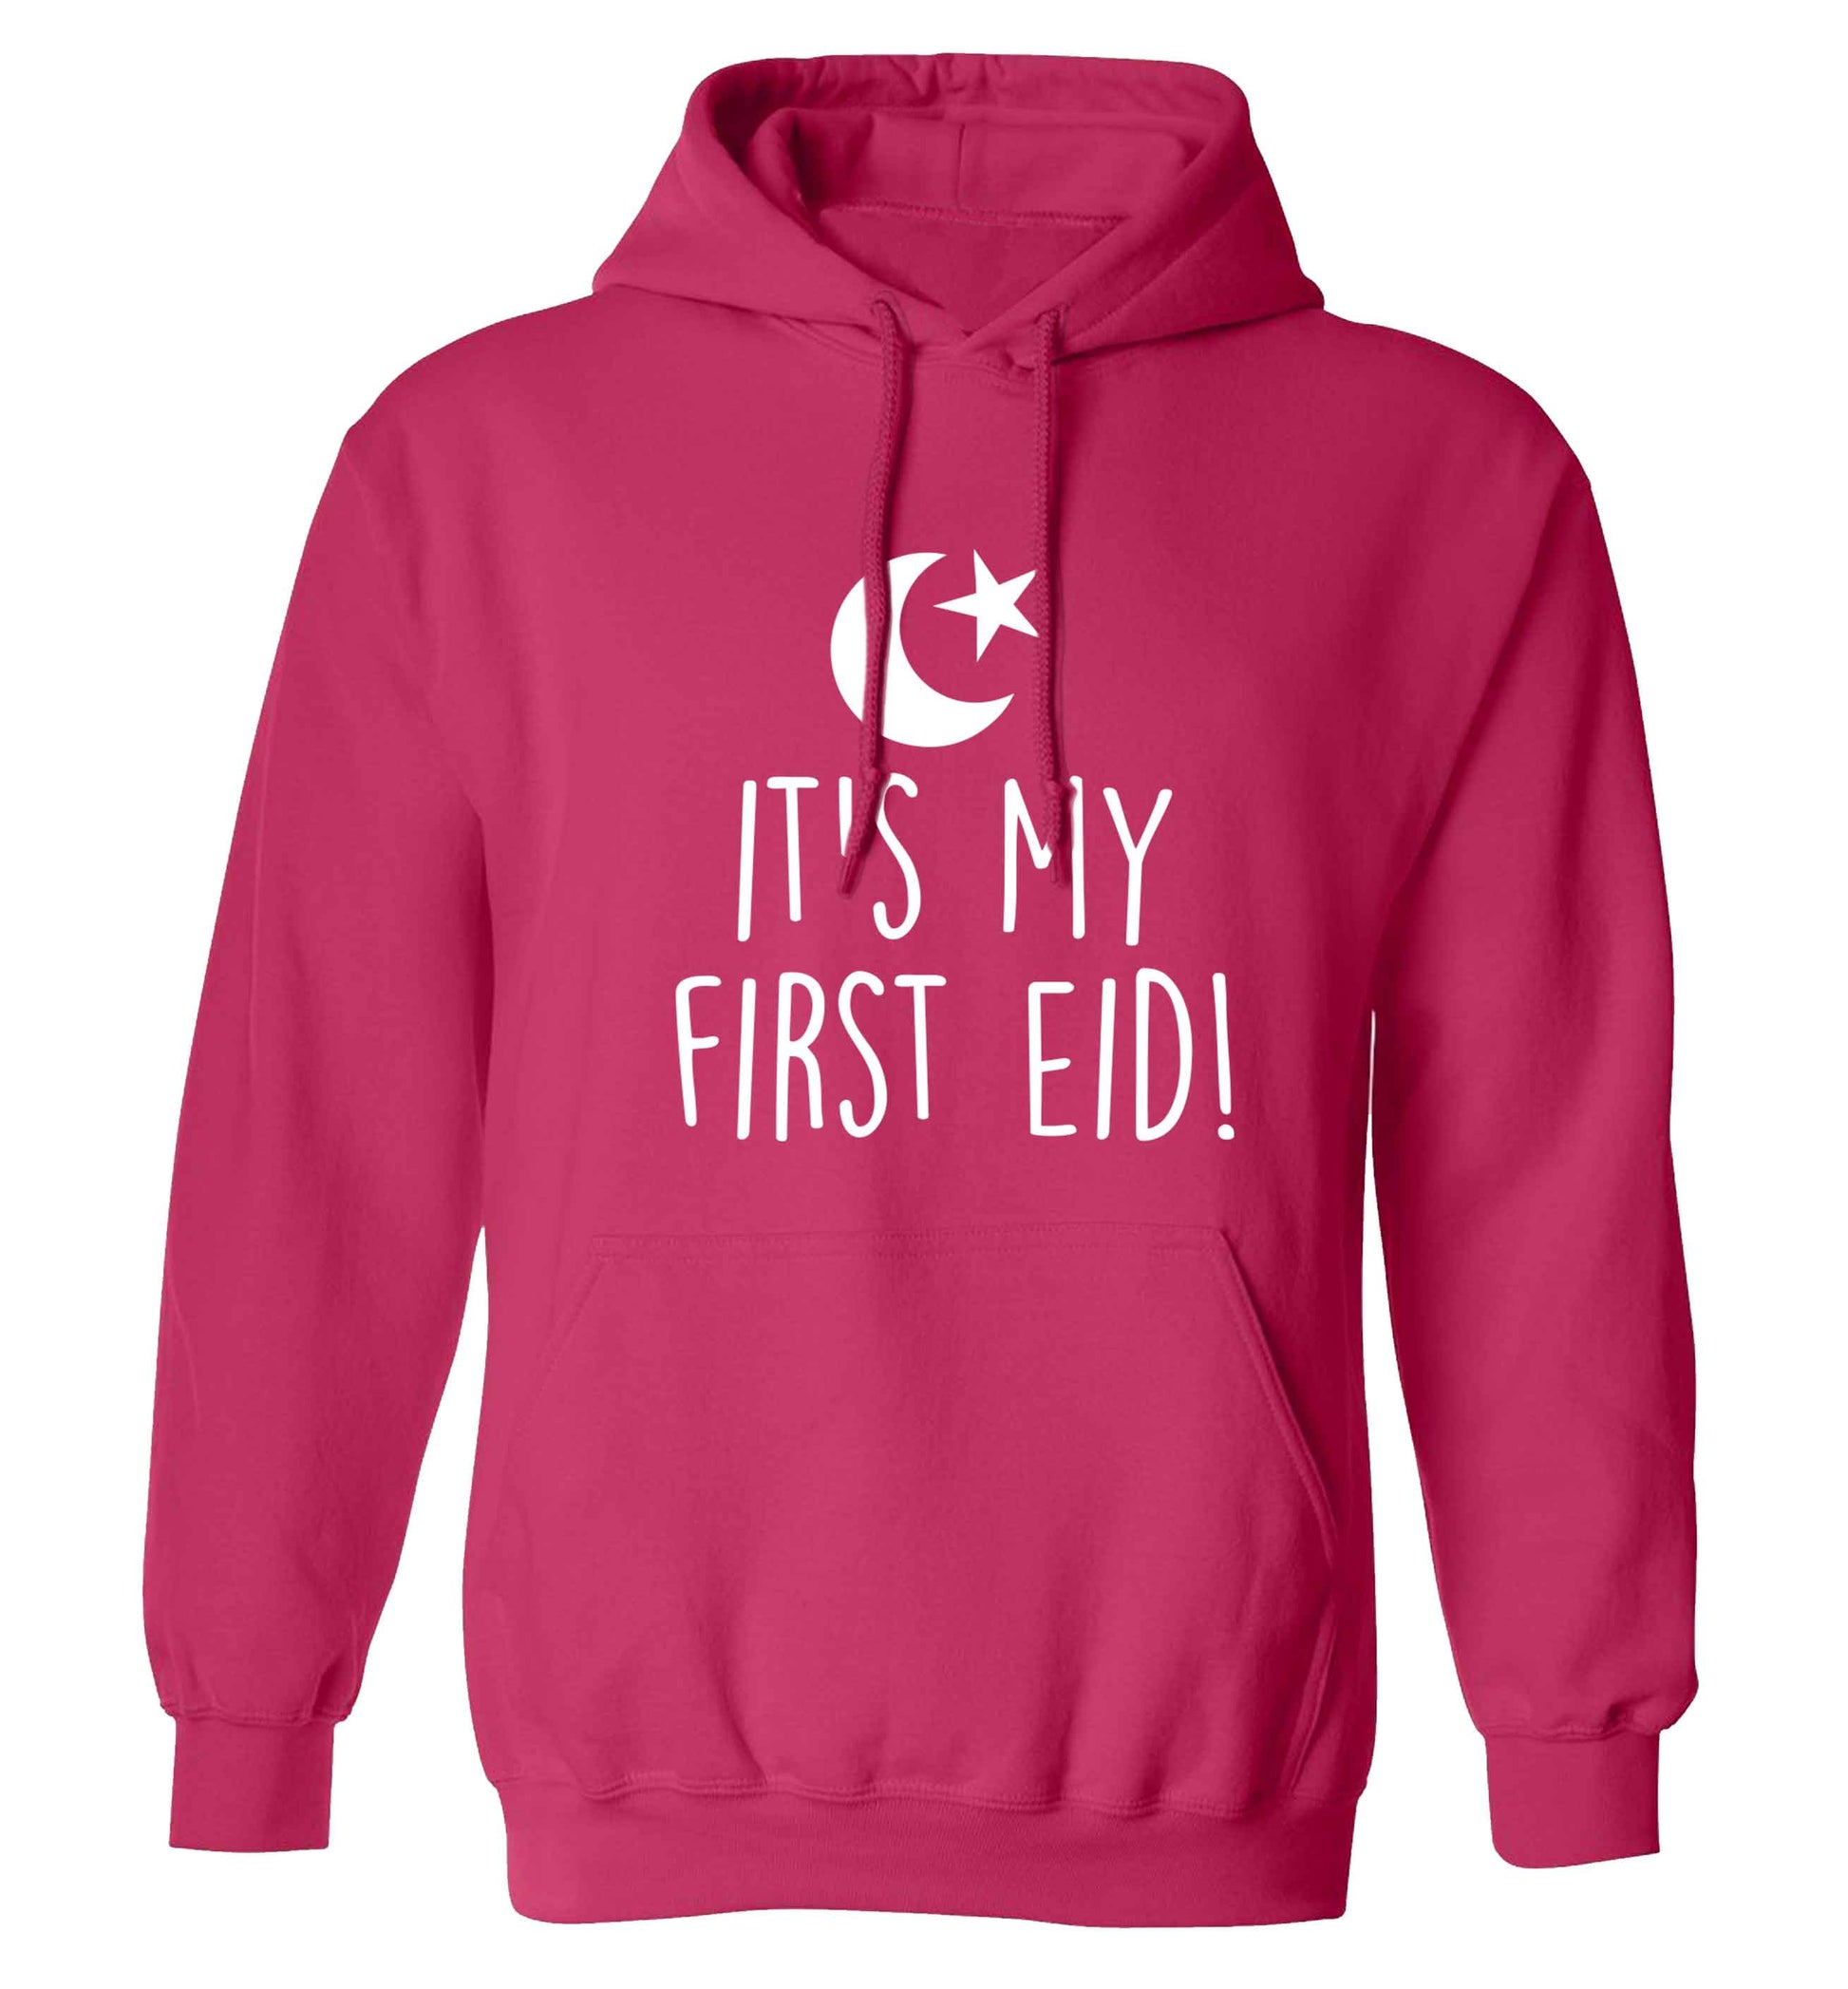 It's my first Eid adults unisex pink hoodie 2XL